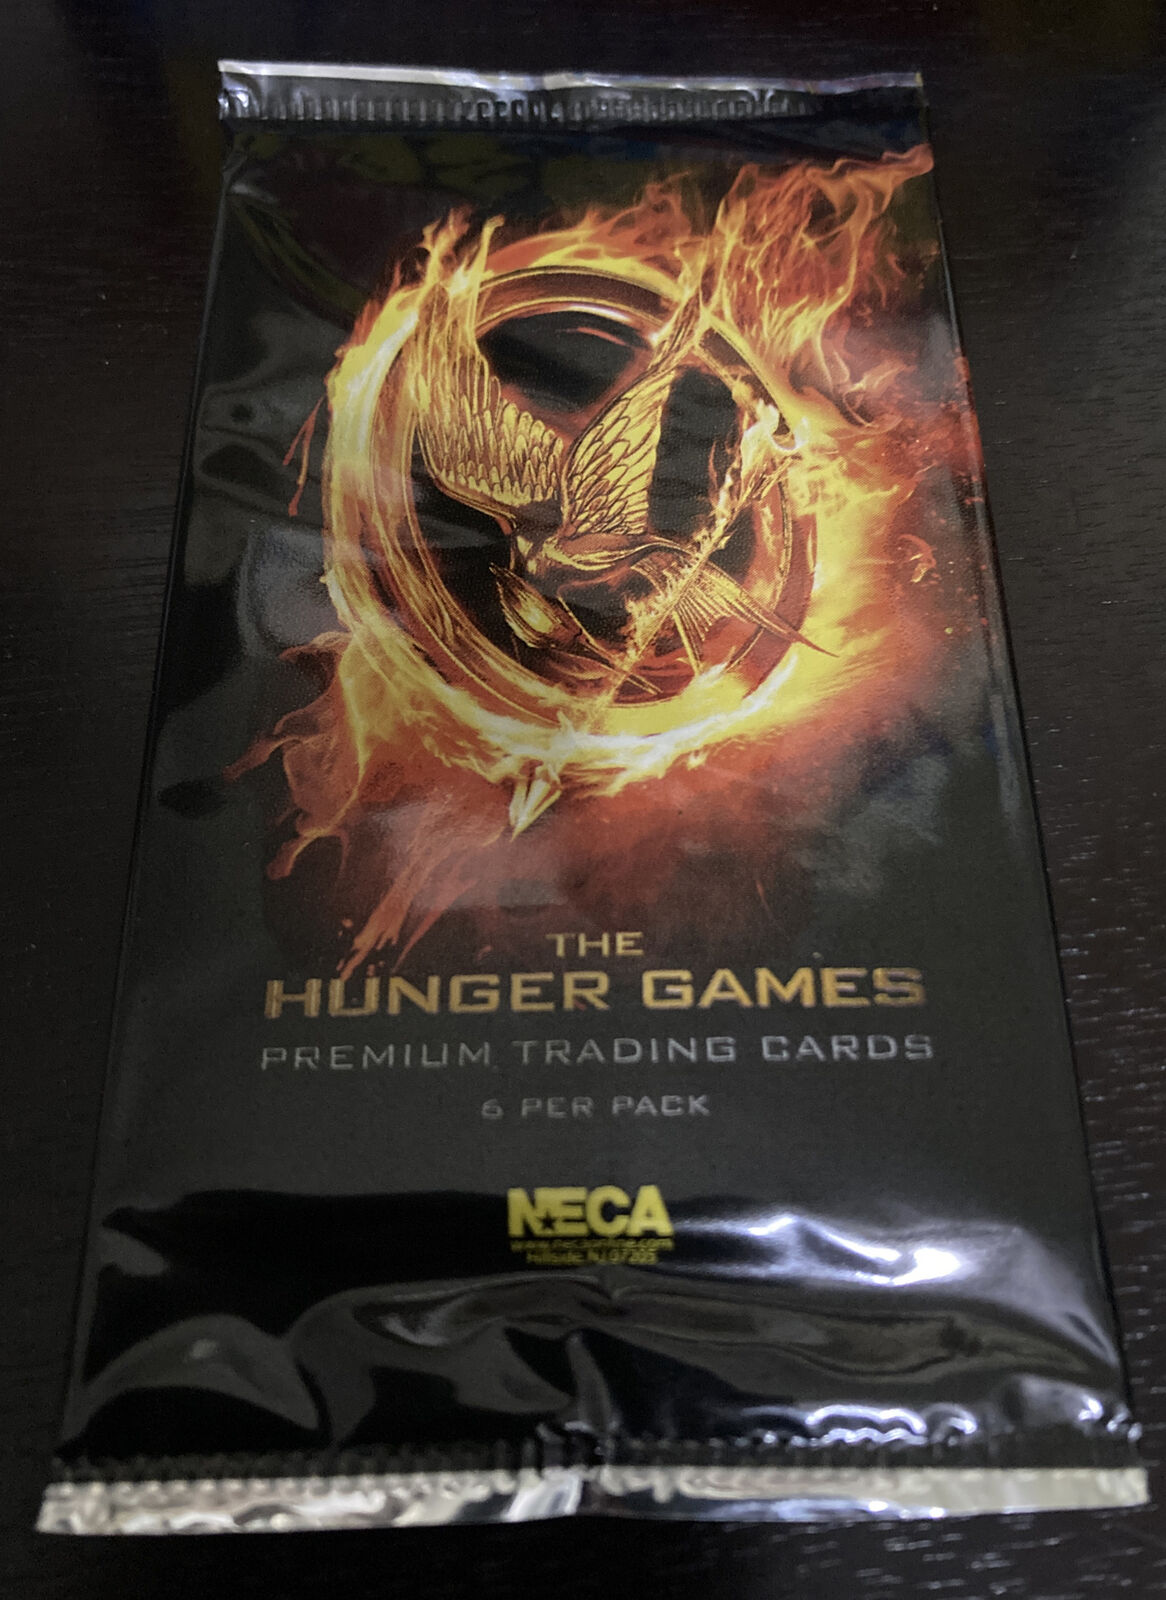 2012 NECA The Hunger Games Trading Card Pack - 6 Cards Per Pack